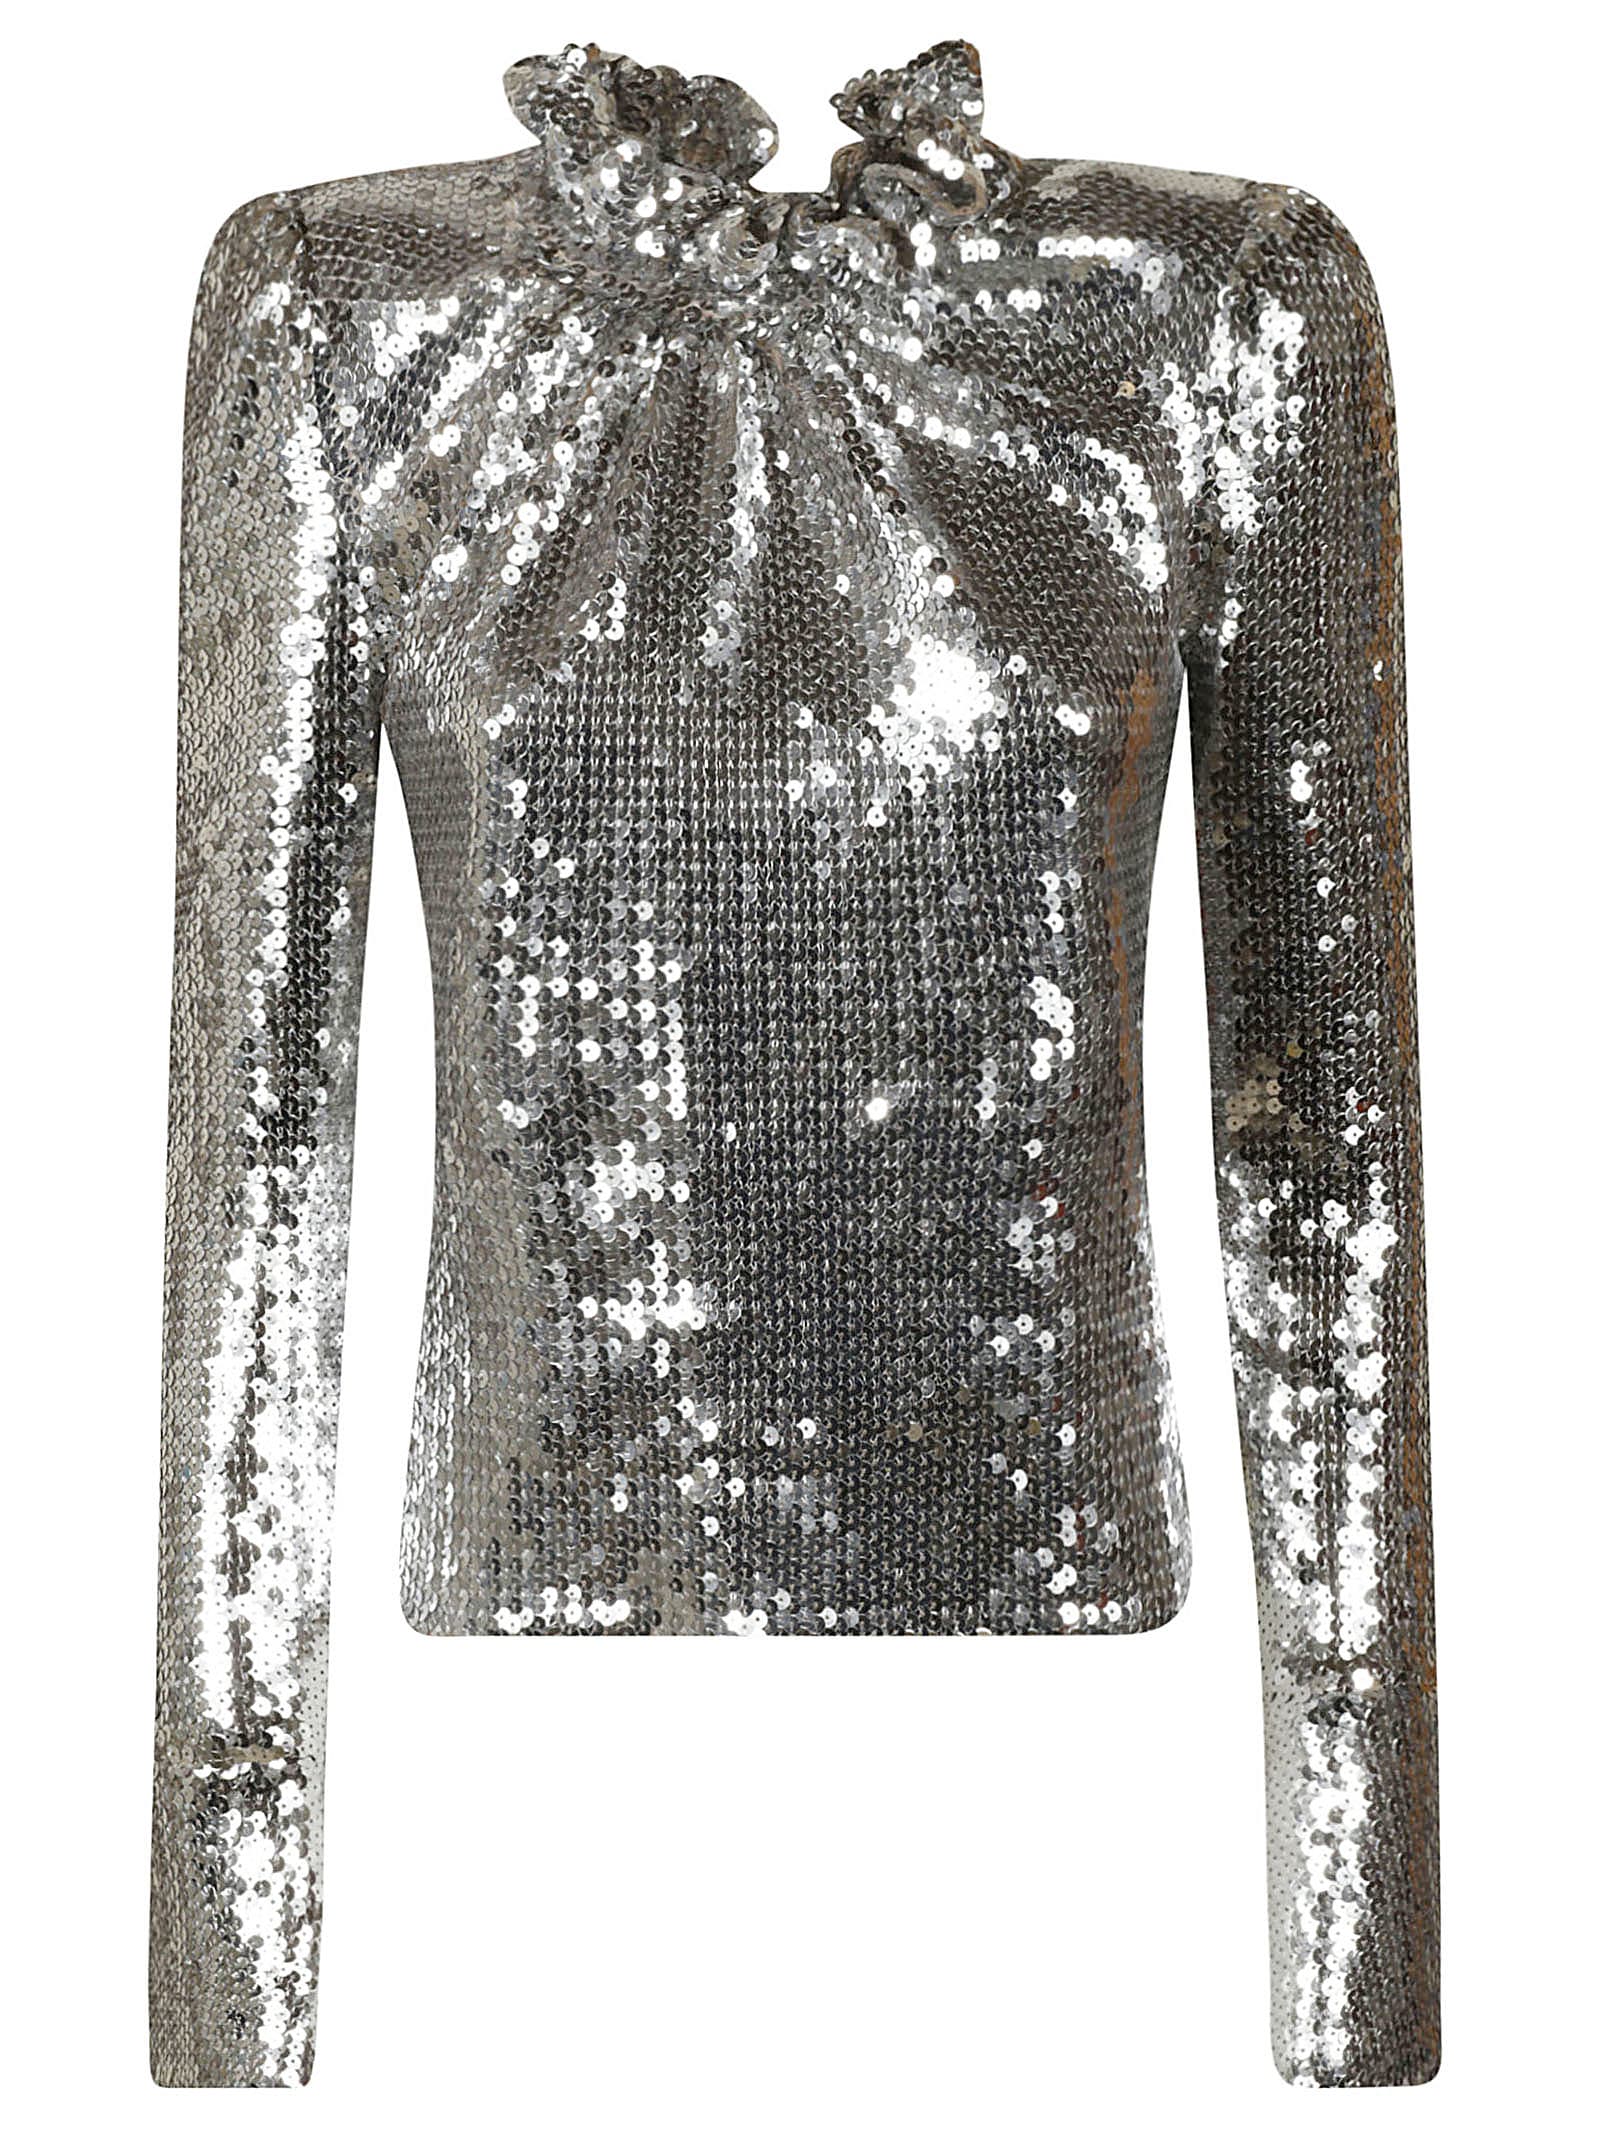 Paco Rabanne All-over Metallic Embellished High-neck Top